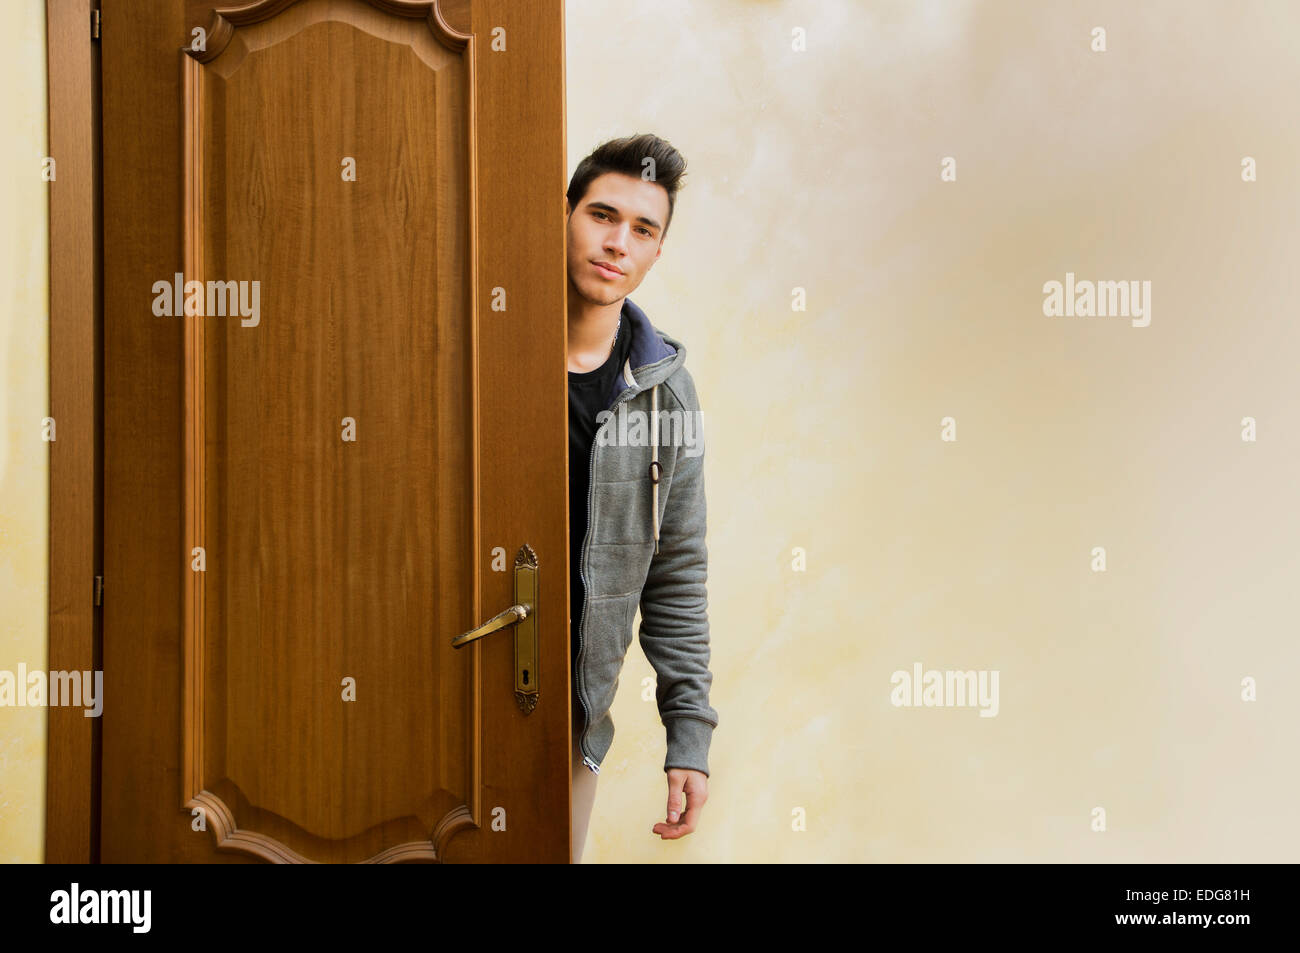 Handsome young man behind open door, getting out, looking at camera with friendly expression Stock Photo